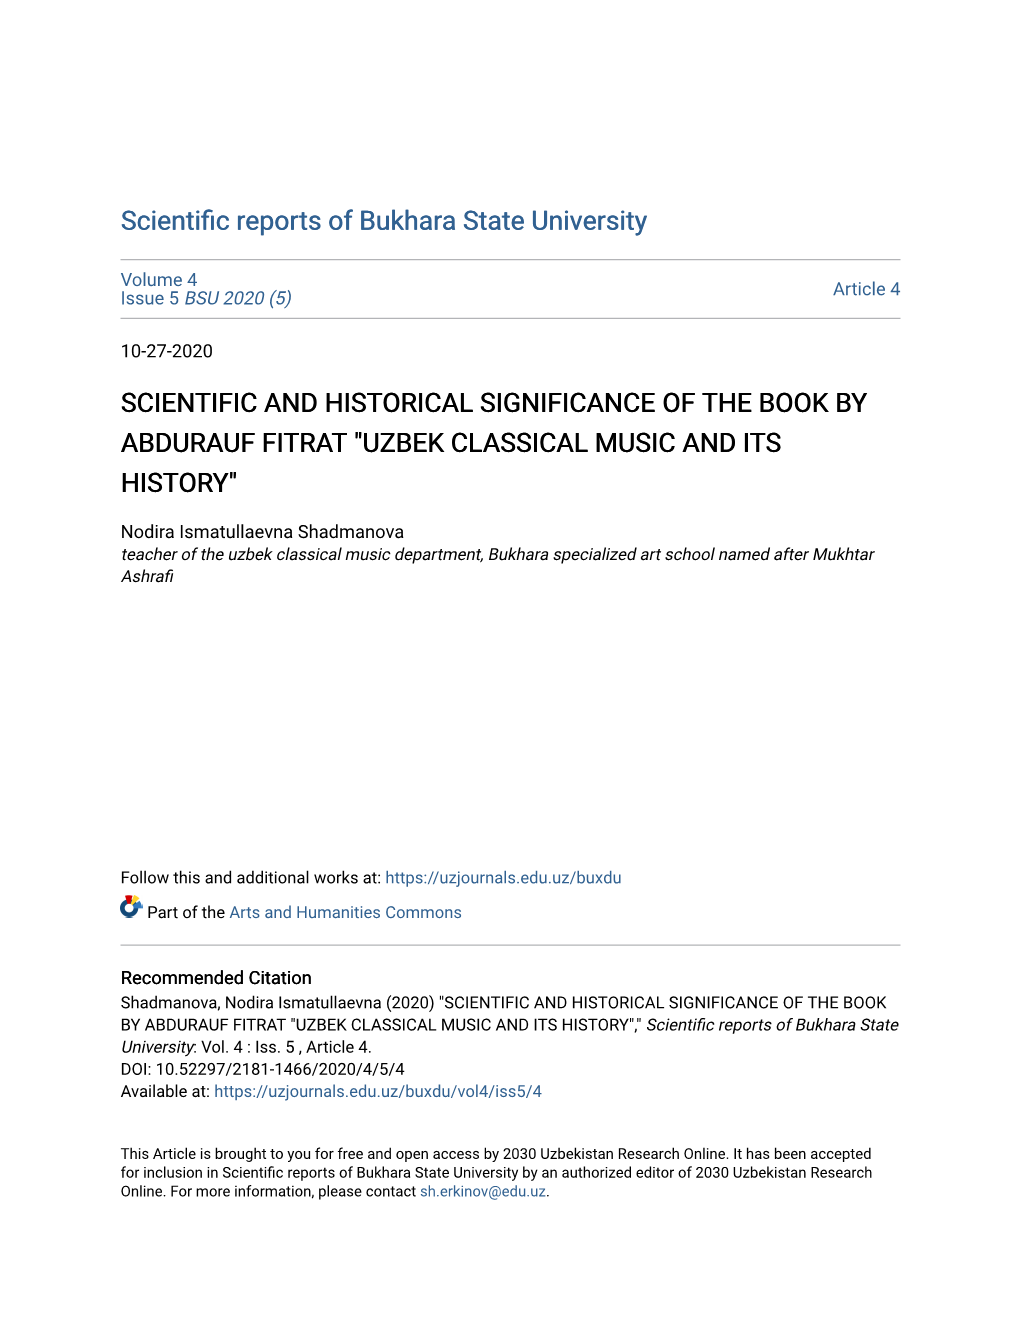 Scientific and Historical Significance of the Book by Abdurauf Fitrat "Uzbek Classical Music and Its History"